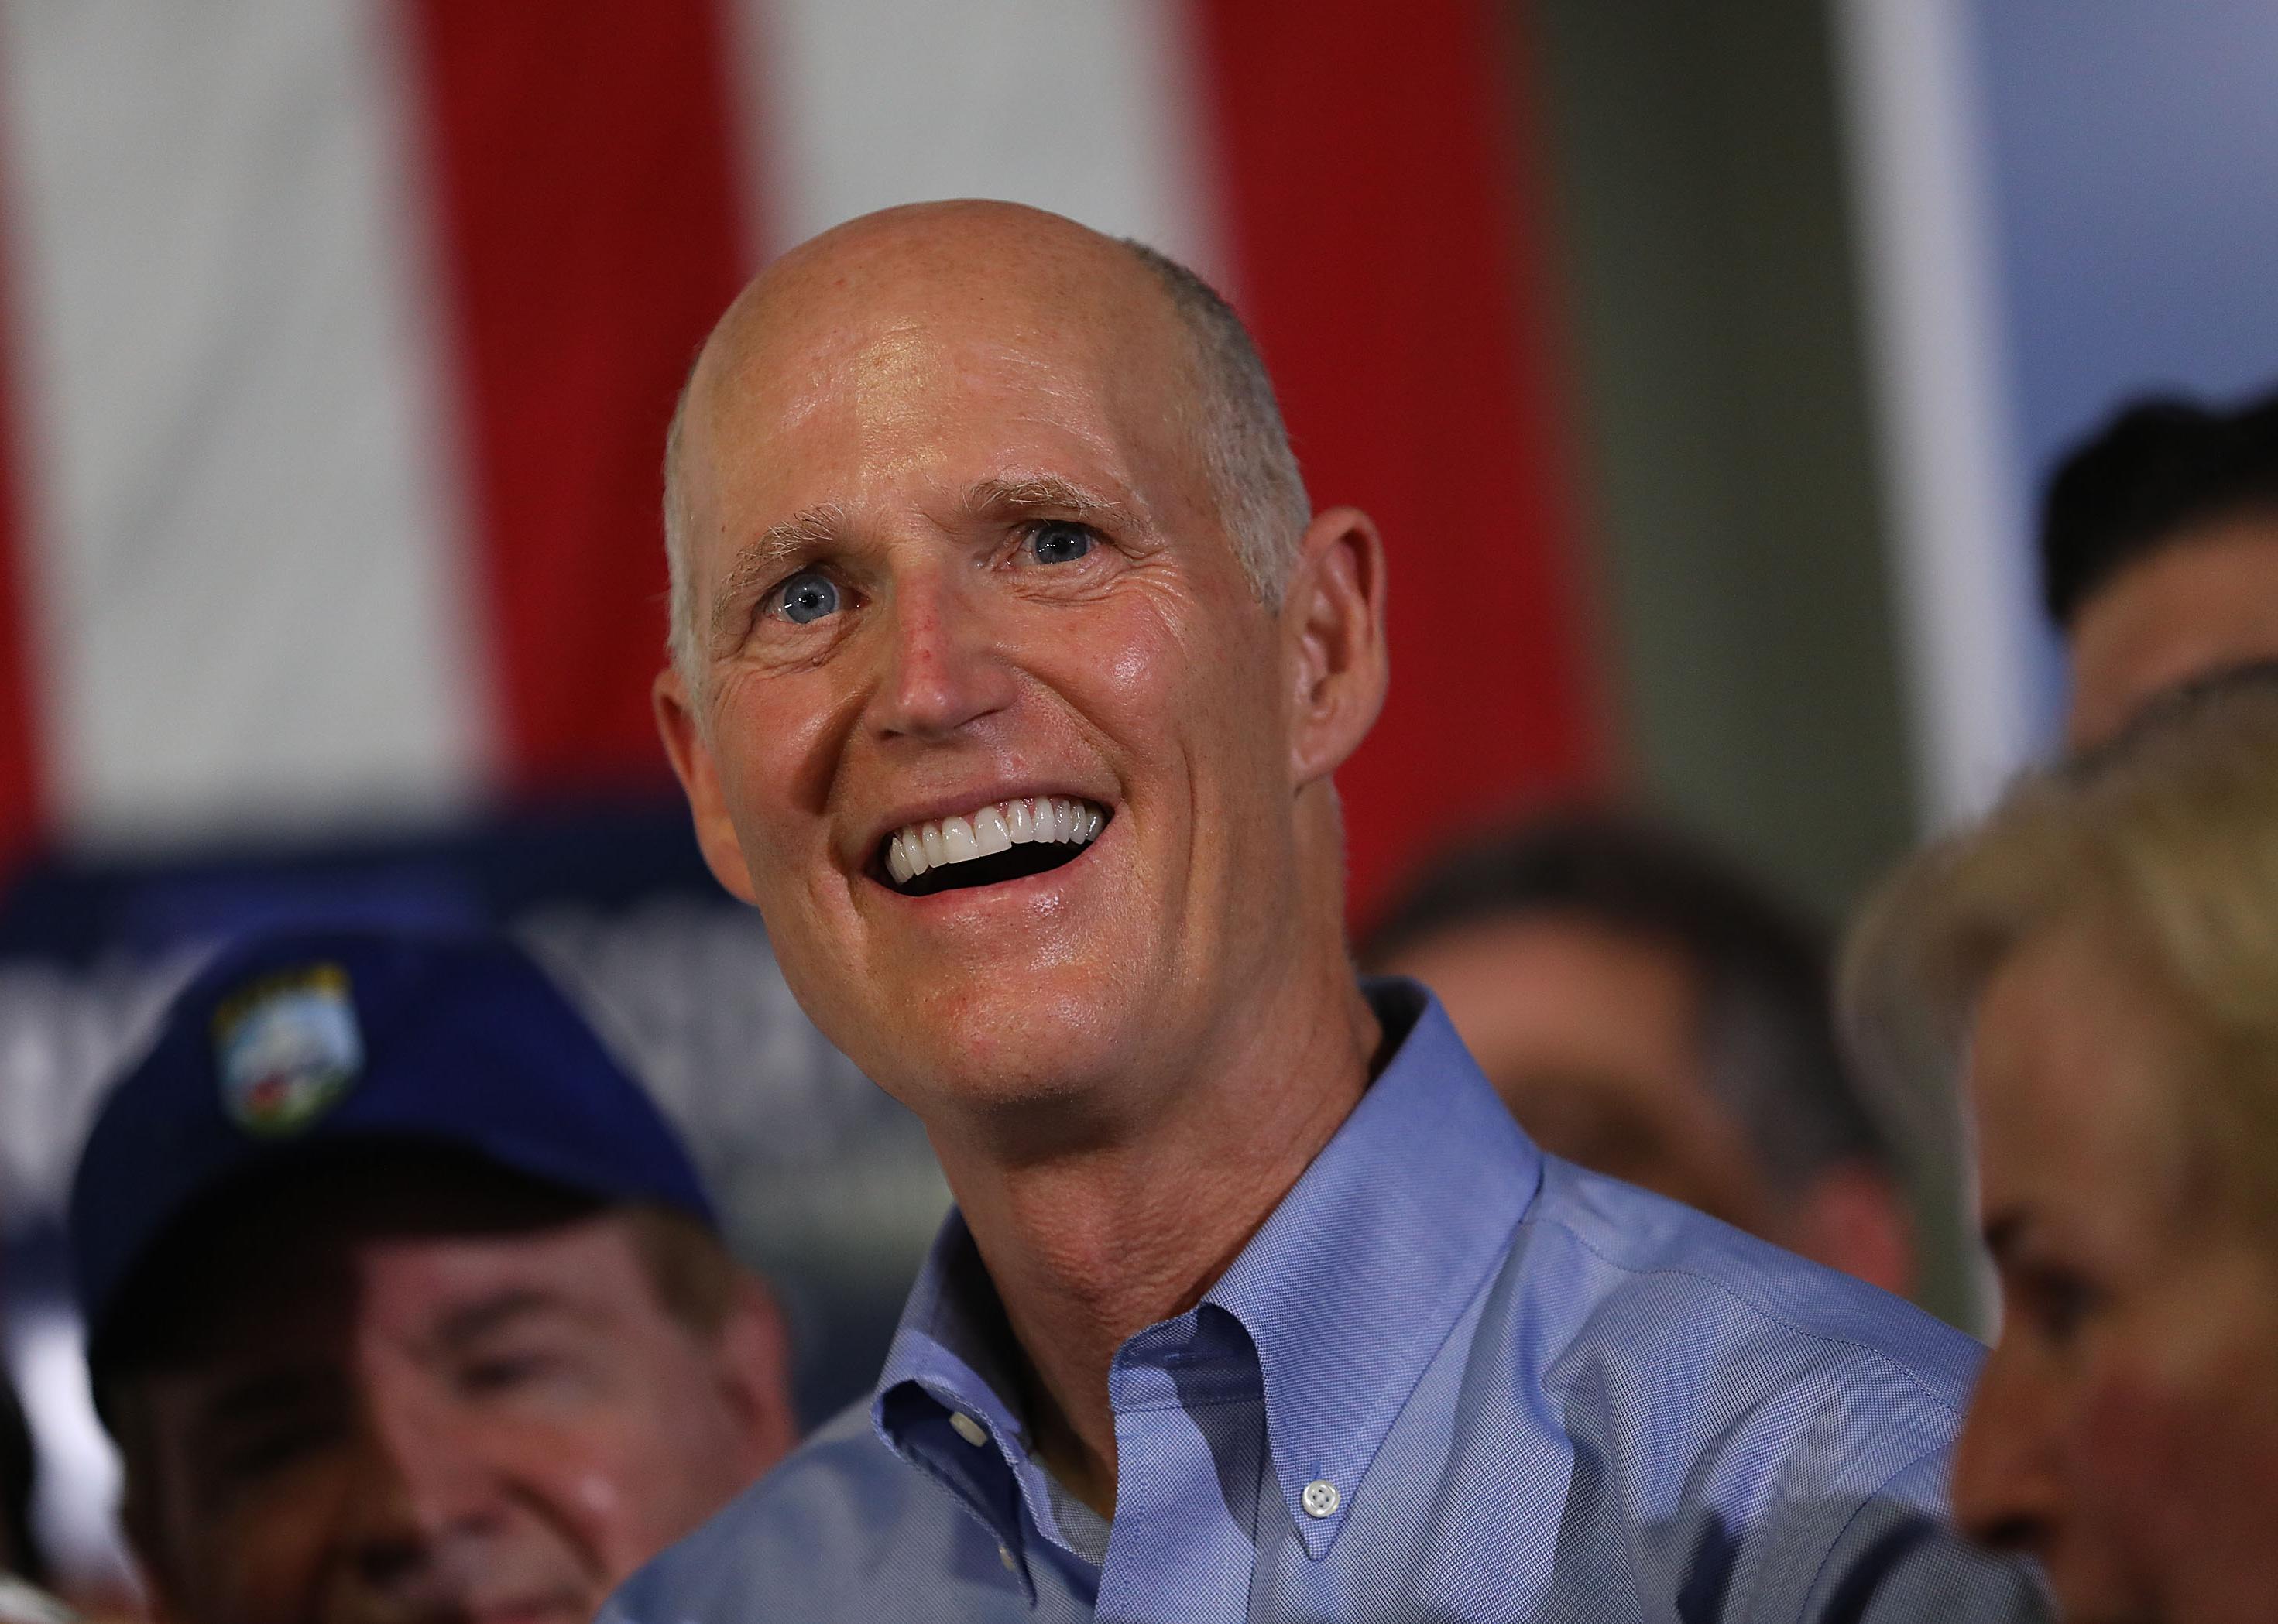 Rick Scott smiling in front of an American flag.